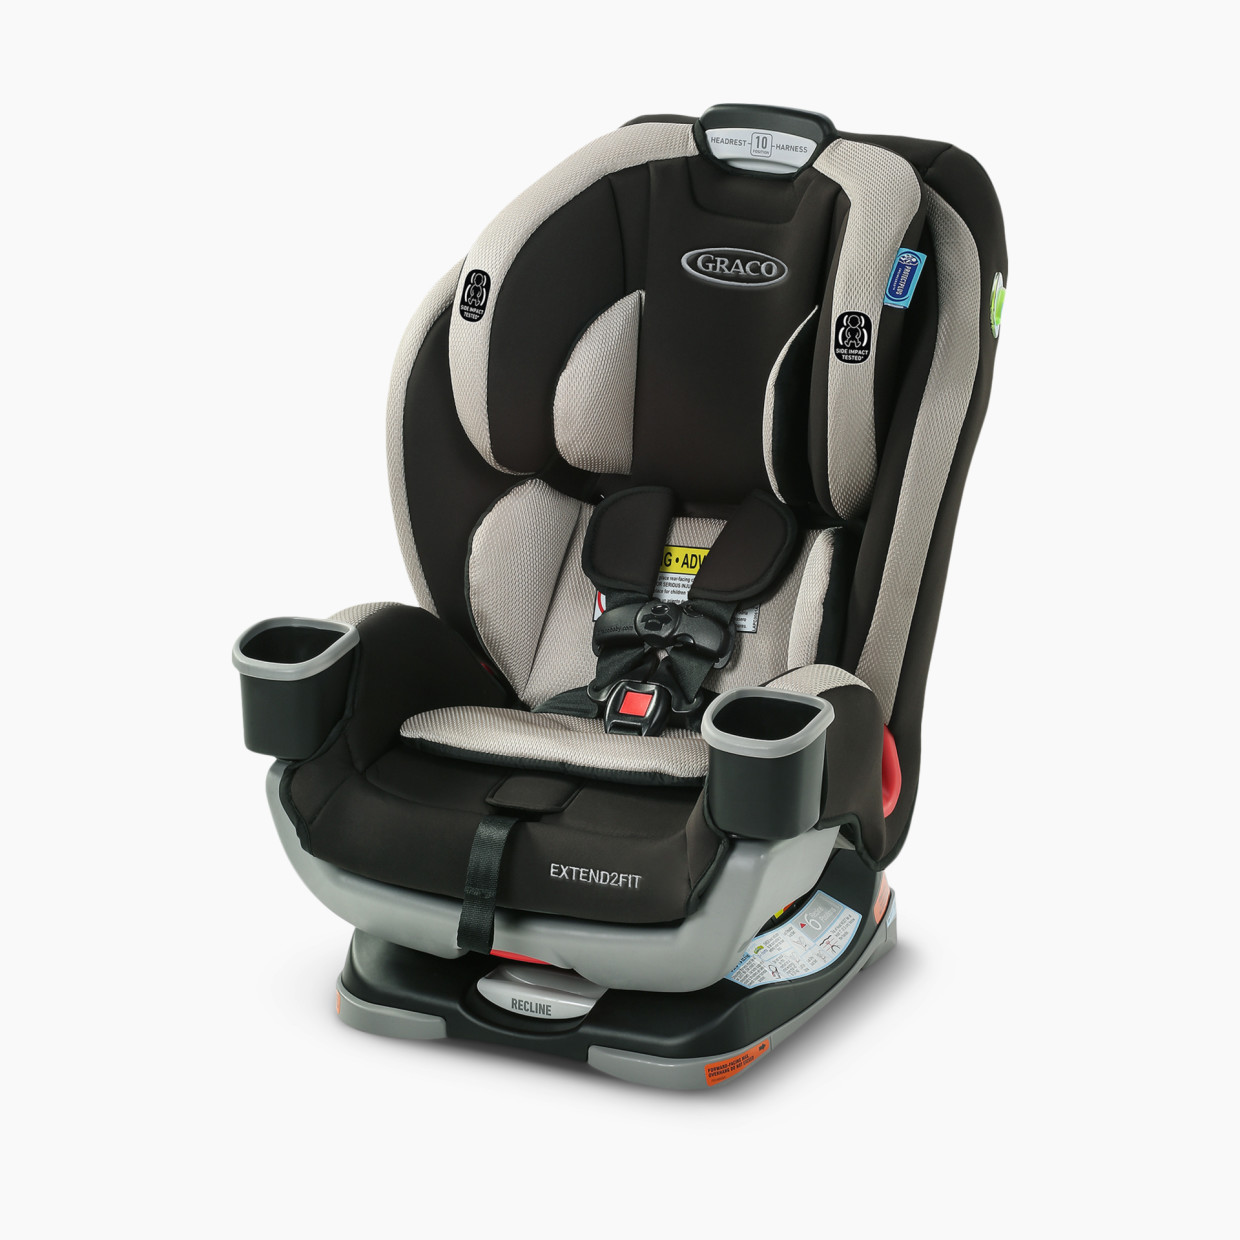 Graco Extend2Fit 3-in-1 Car Seat - Stocklyn.